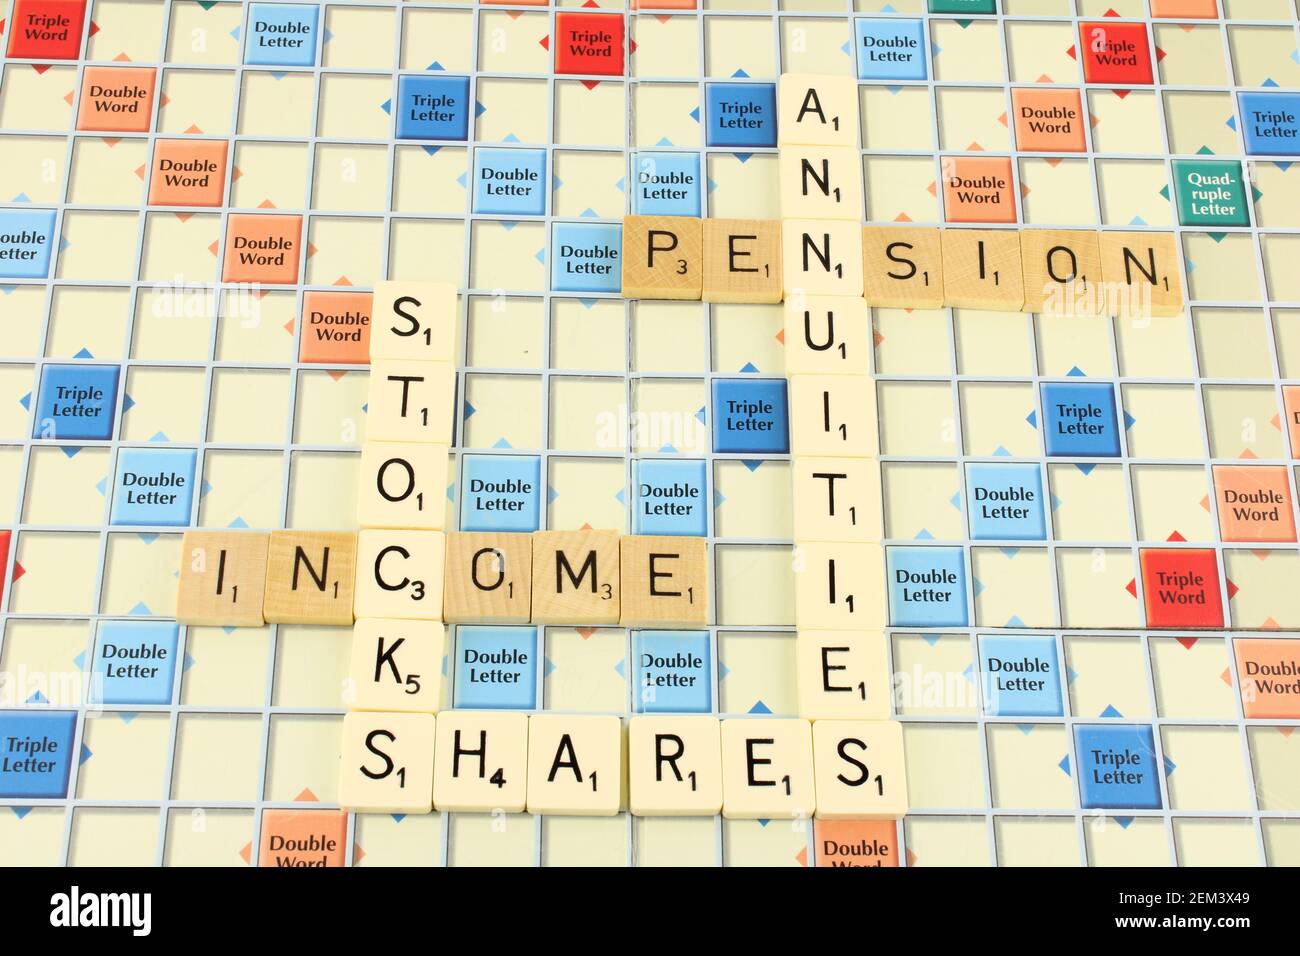 Stock shares and annuities, phrase on a scrabble board with stocks shares annuities in white for emphasis Stock Photo